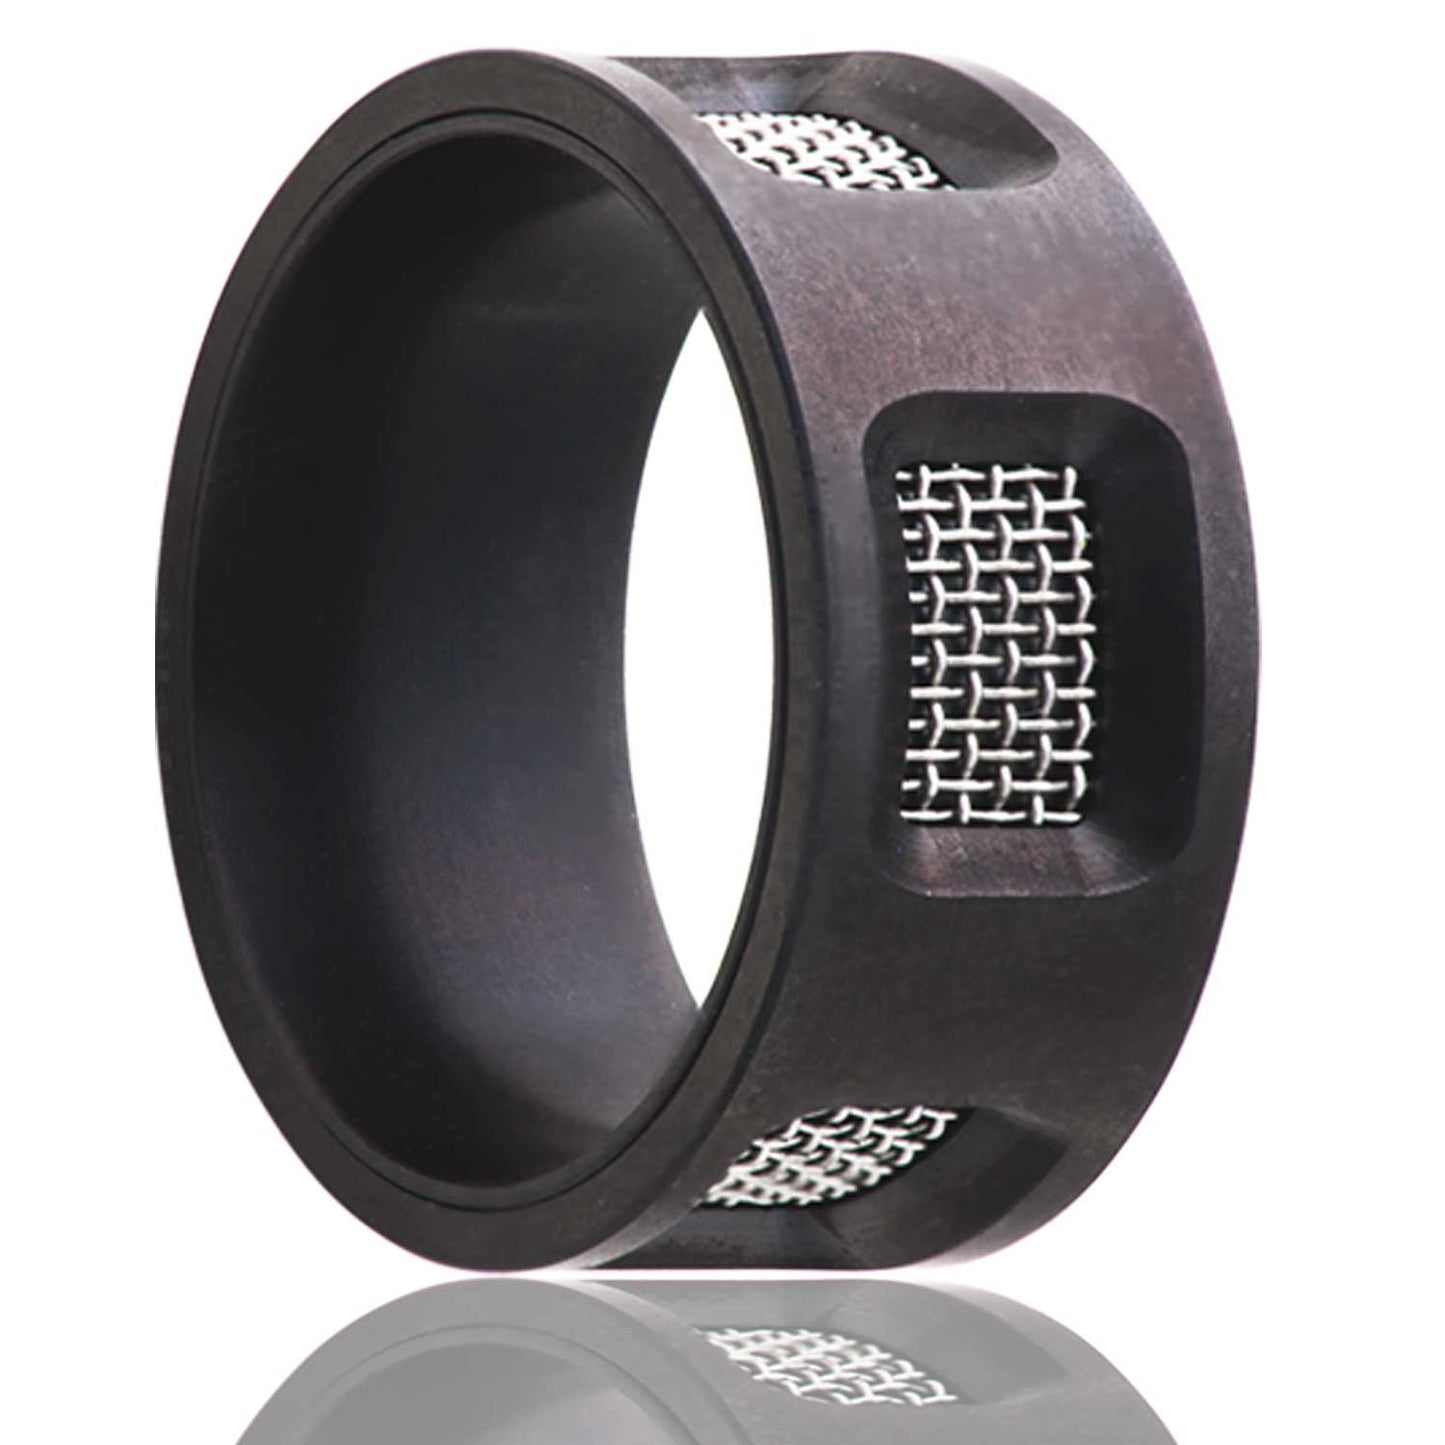 A zirconium men's wedding band with mesh inlays displayed on a neutral white background.